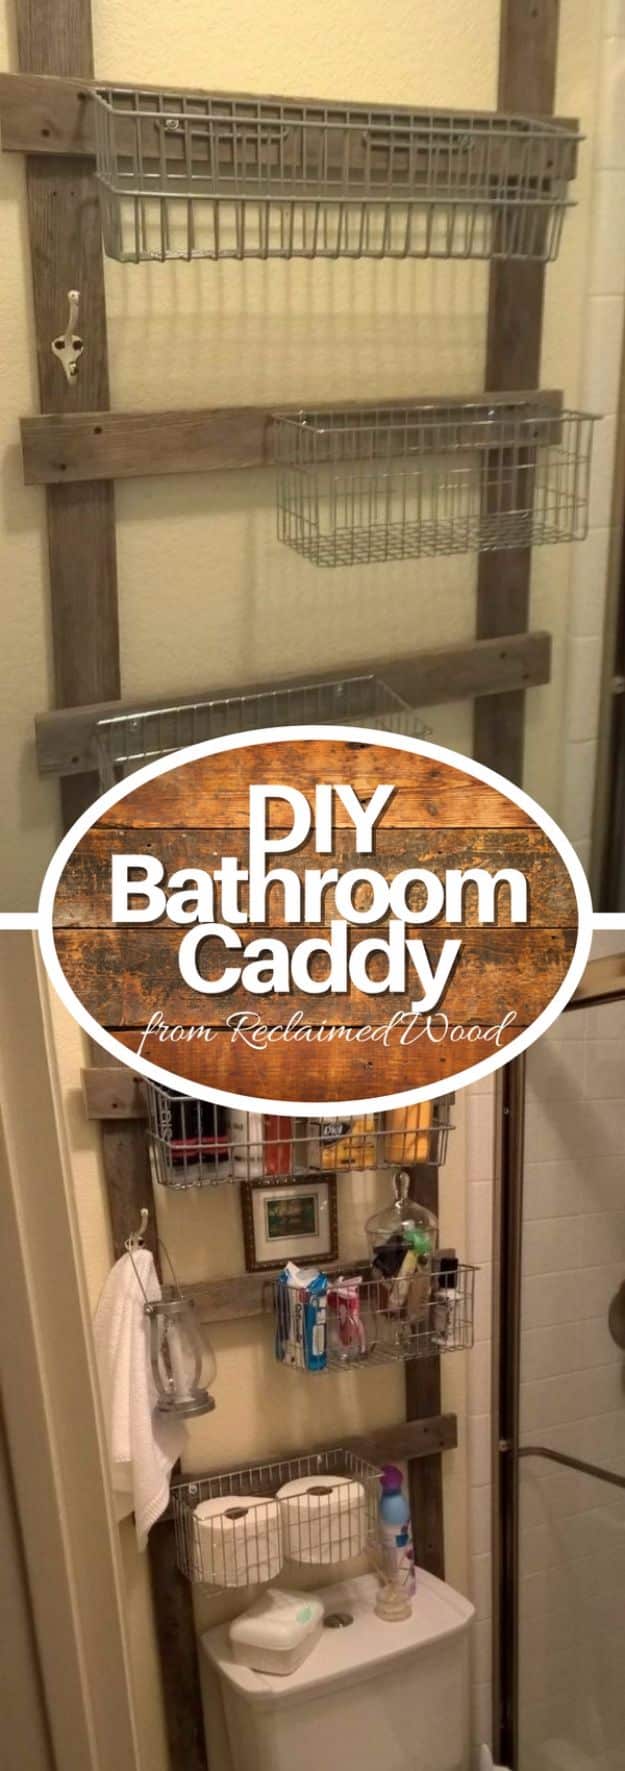 DIY Bathroom Storage Ideas - Reclaimed Bathroom Caddy - Best Solutions for Under Sink Organization, Countertop Jars and Boxes, Counter Caddy With Mason Jars, Over Toilet Ideas and Shelves, Easy Tips and Tricks for Small Spaces To Organize Bath Products #storageideas #diybathroom #bathroomdecor